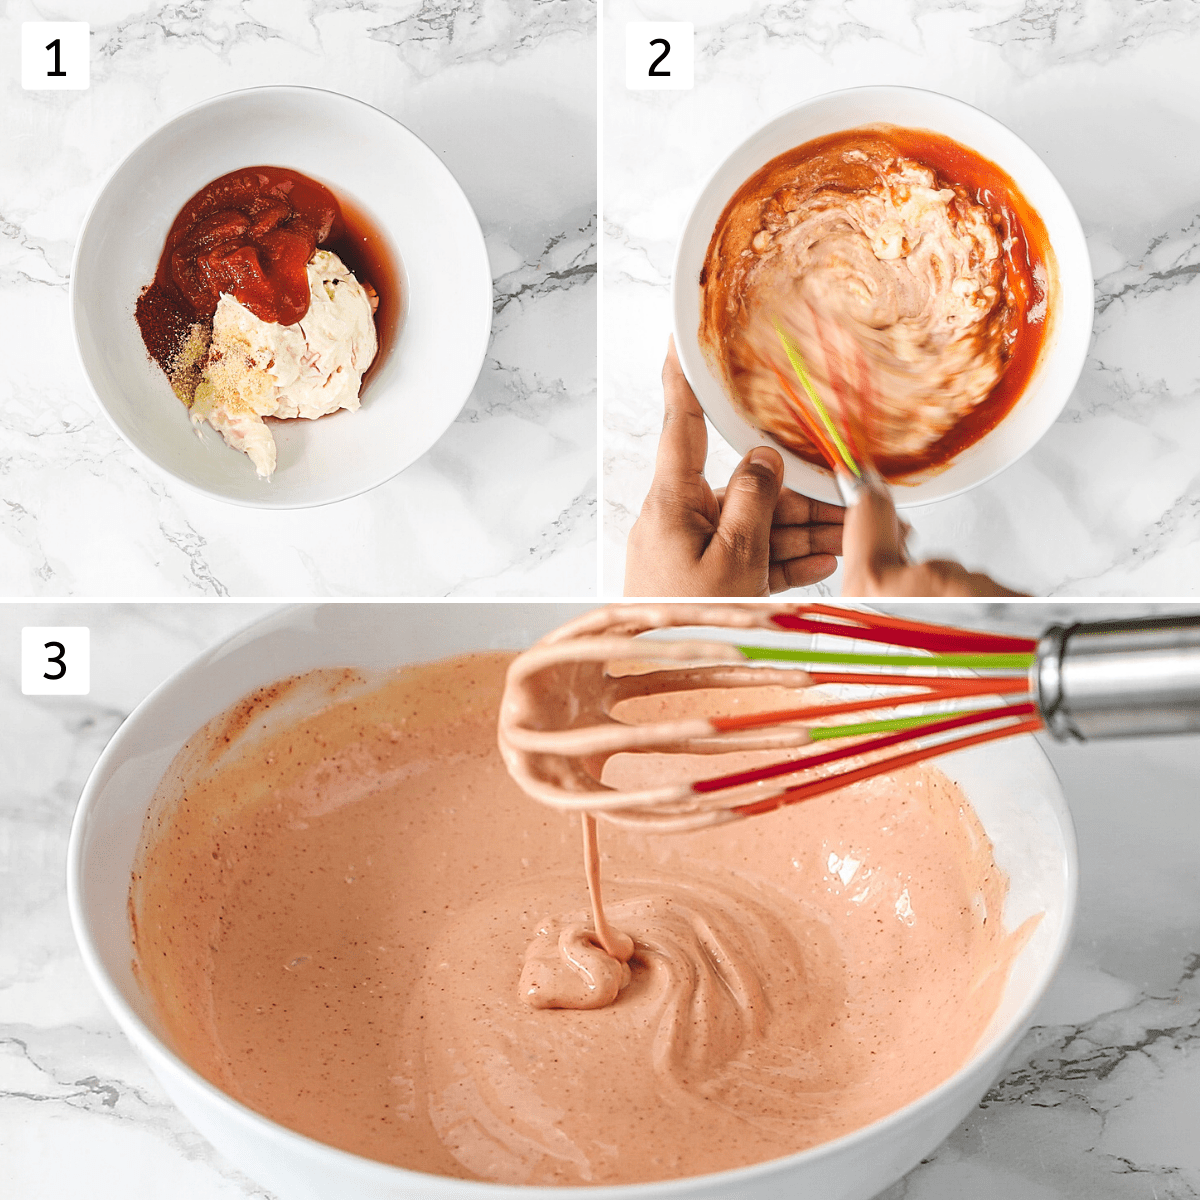 Collage of 3 steps showing adding and mixing the ingredients to make sauce.